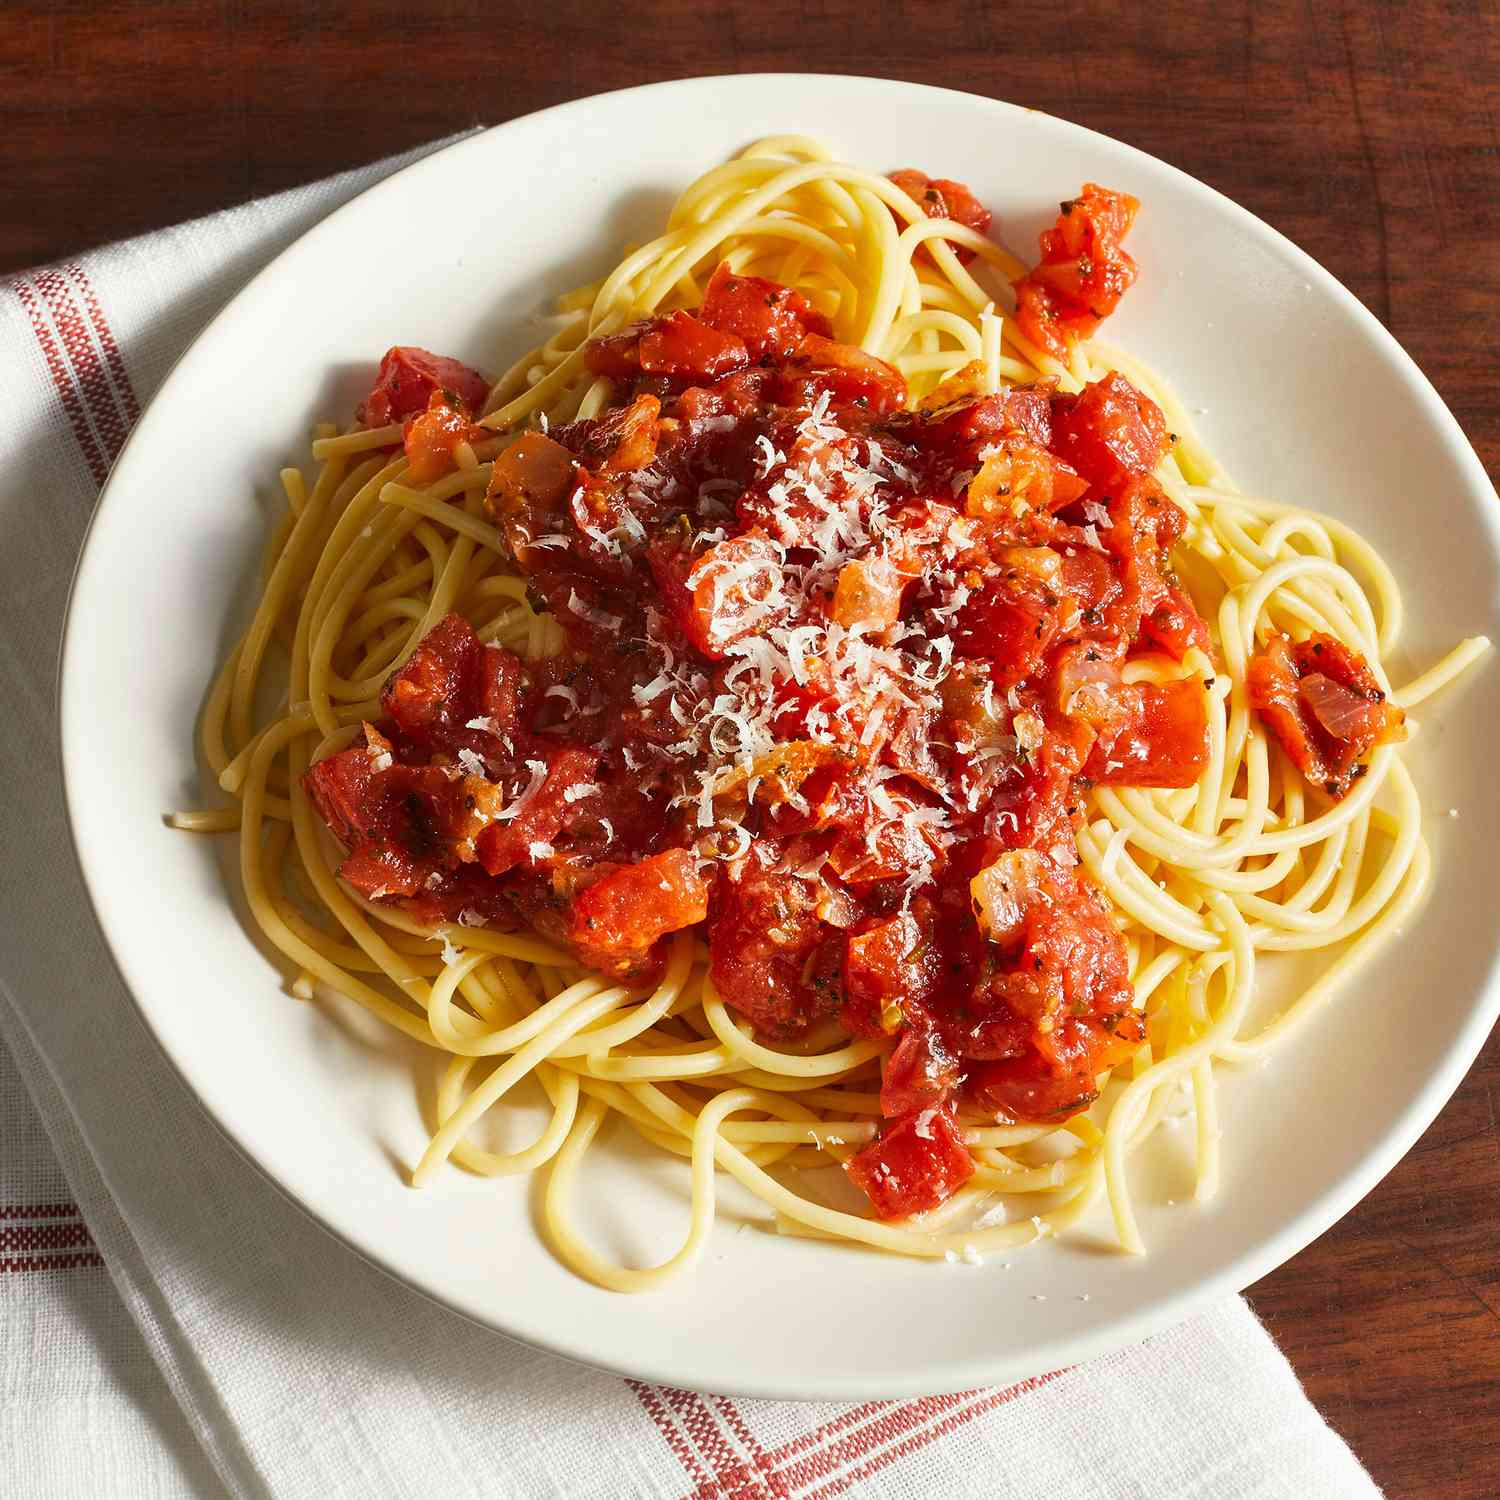 a single plate of spaghetti with sauce made from fresh tomatoes.